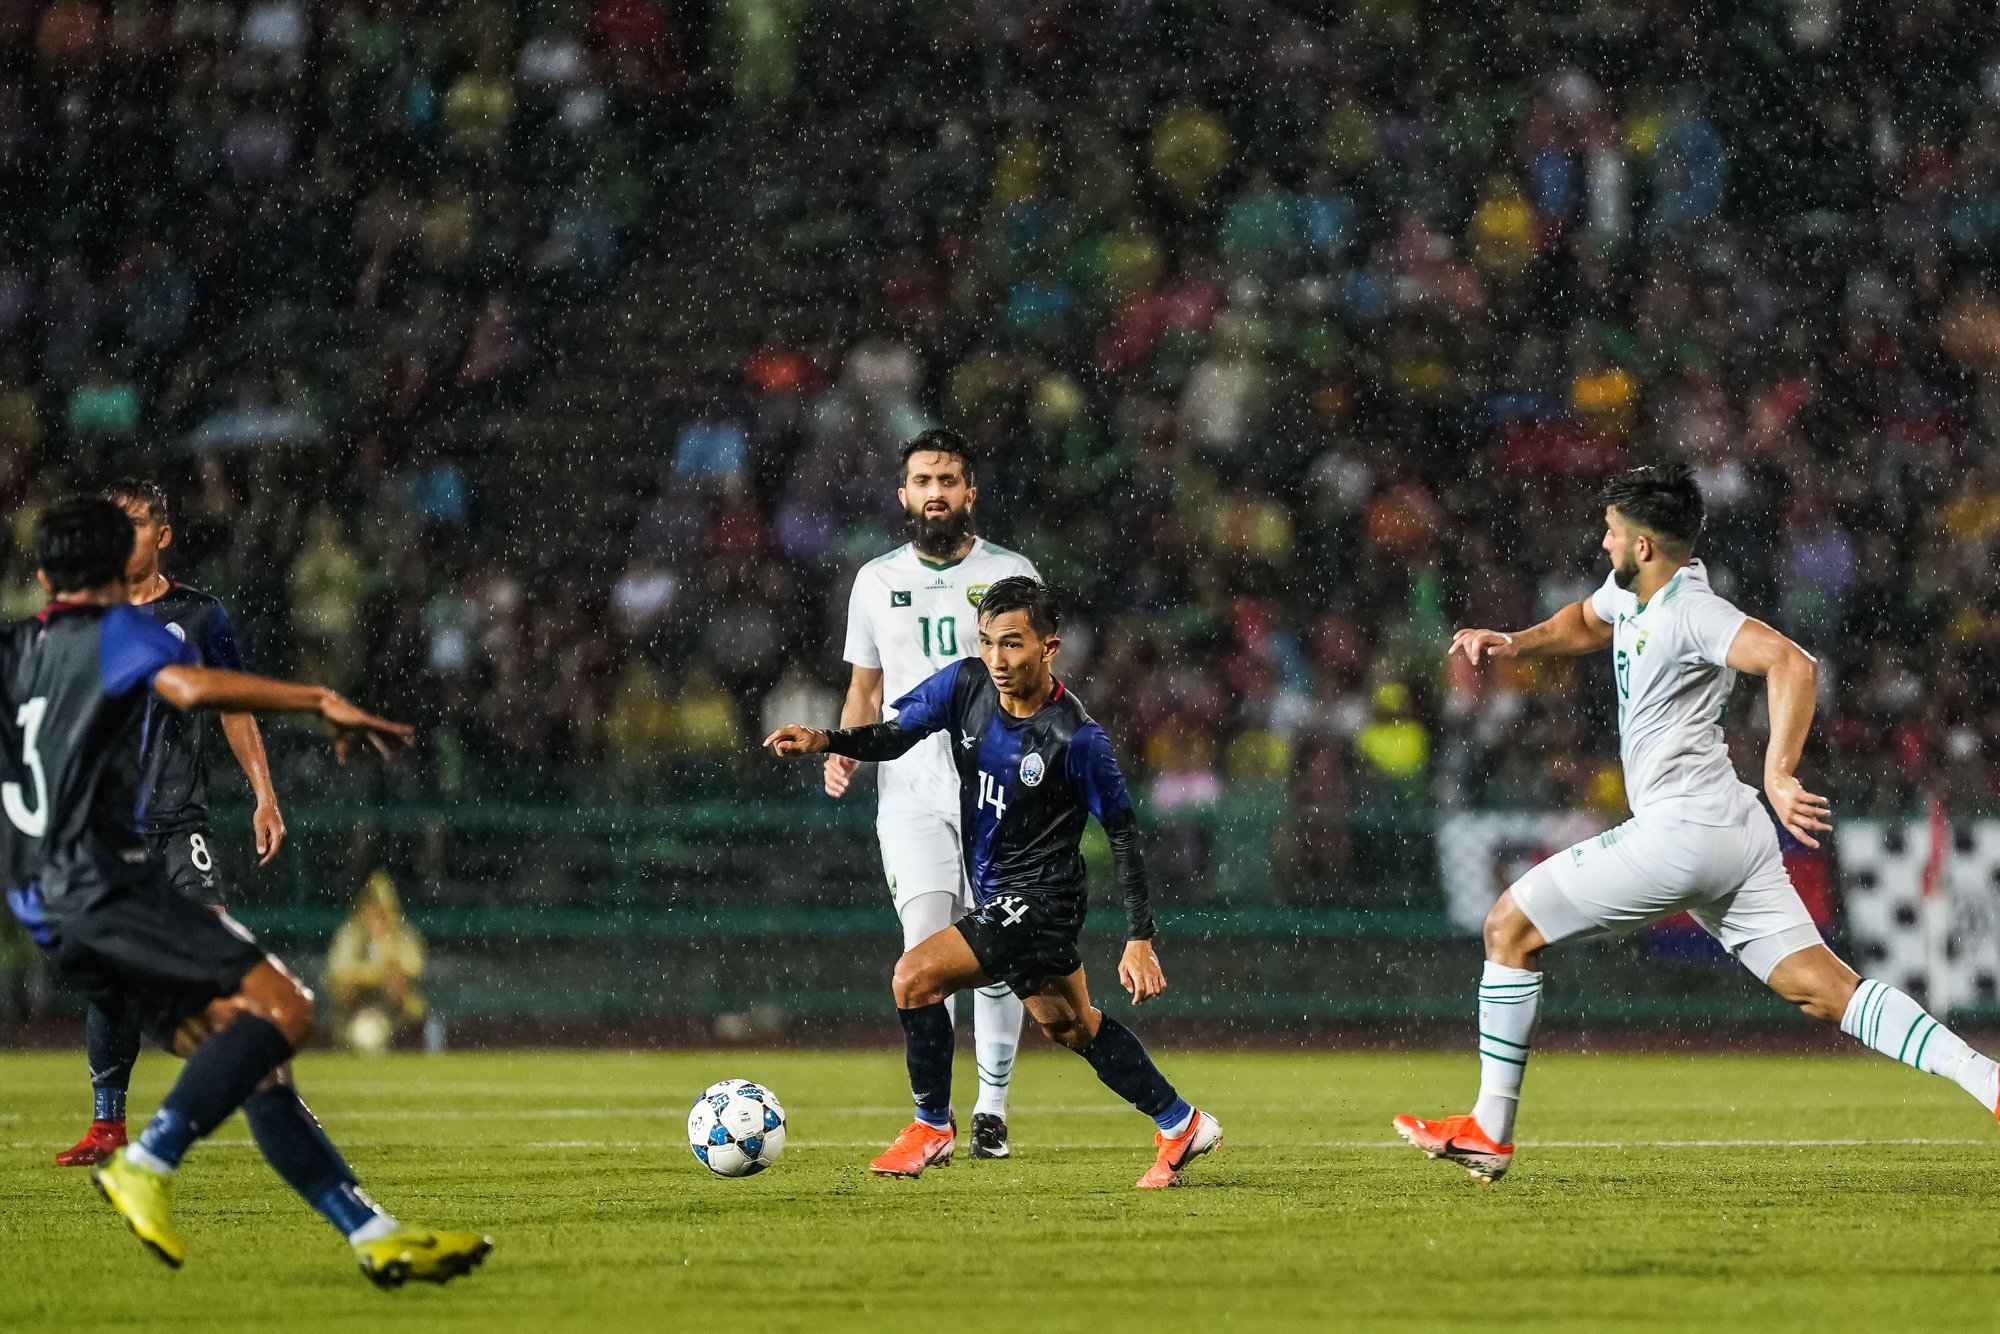 Players in action during match between Pakistan and Cambodia in 2019. Photo: AFC